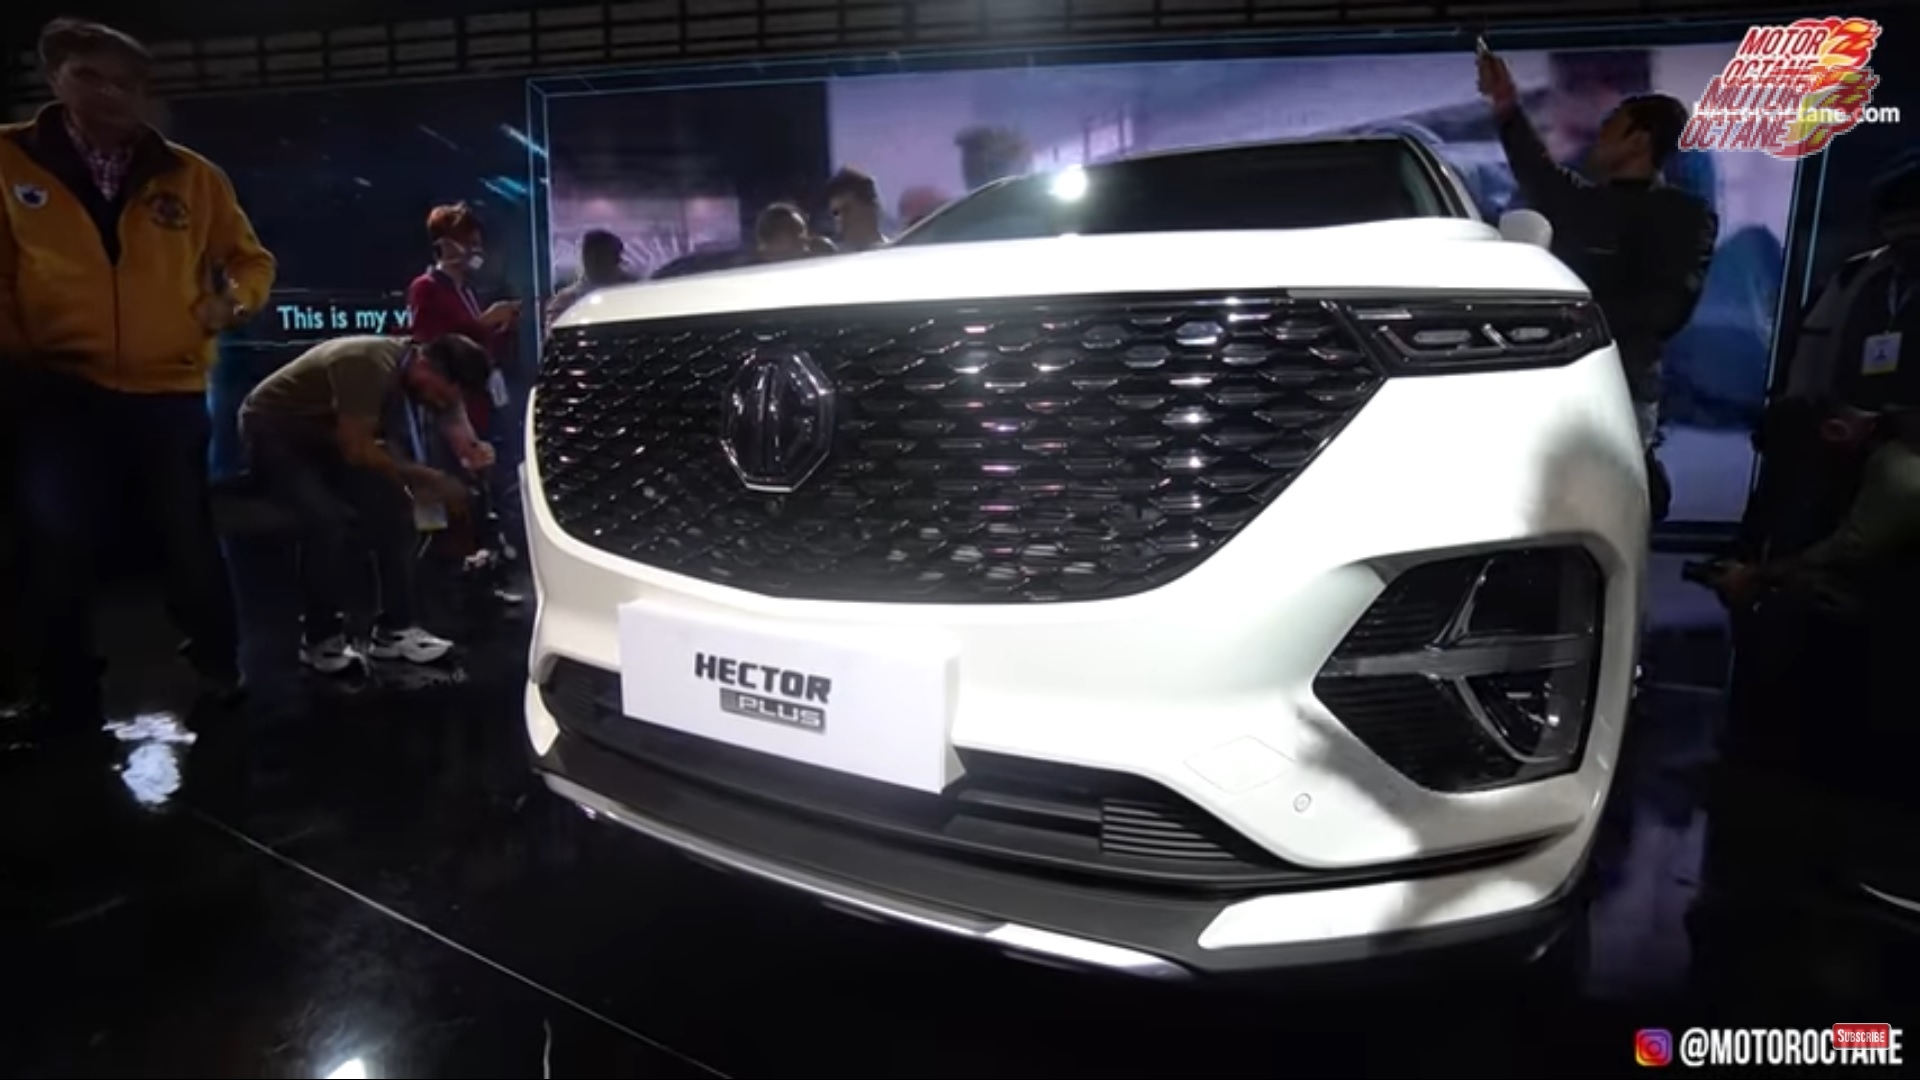 MG hector plus